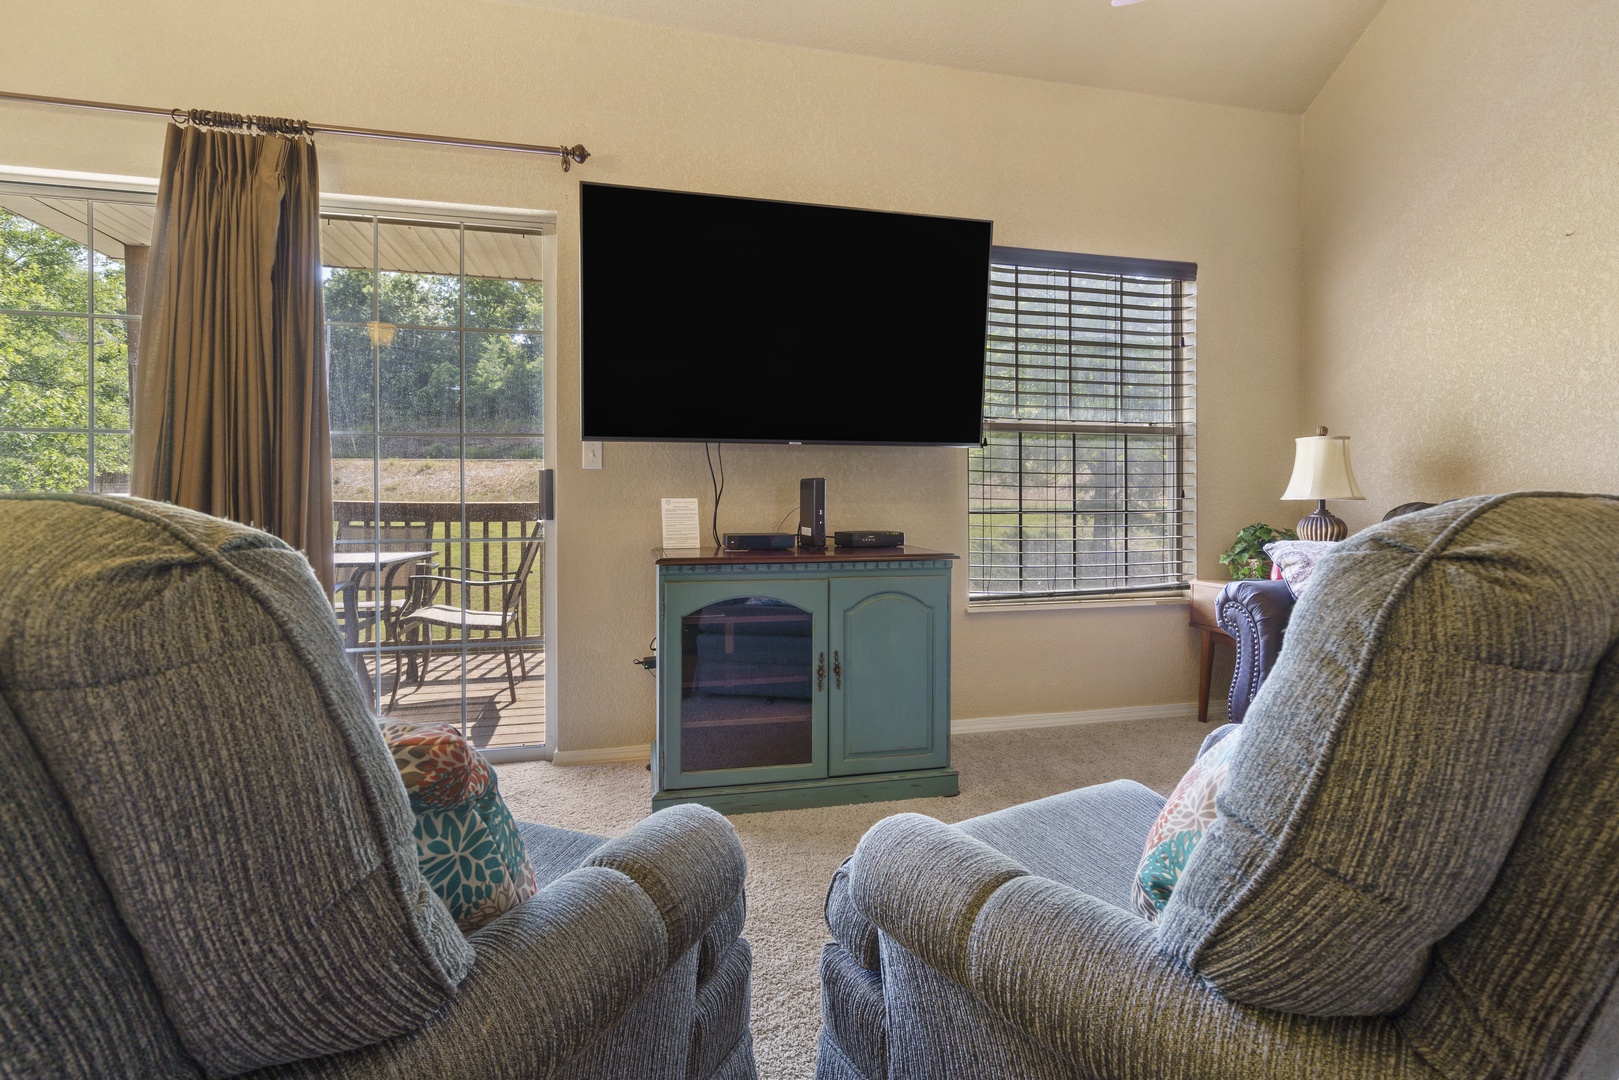 Living room features SmartTV and patio access